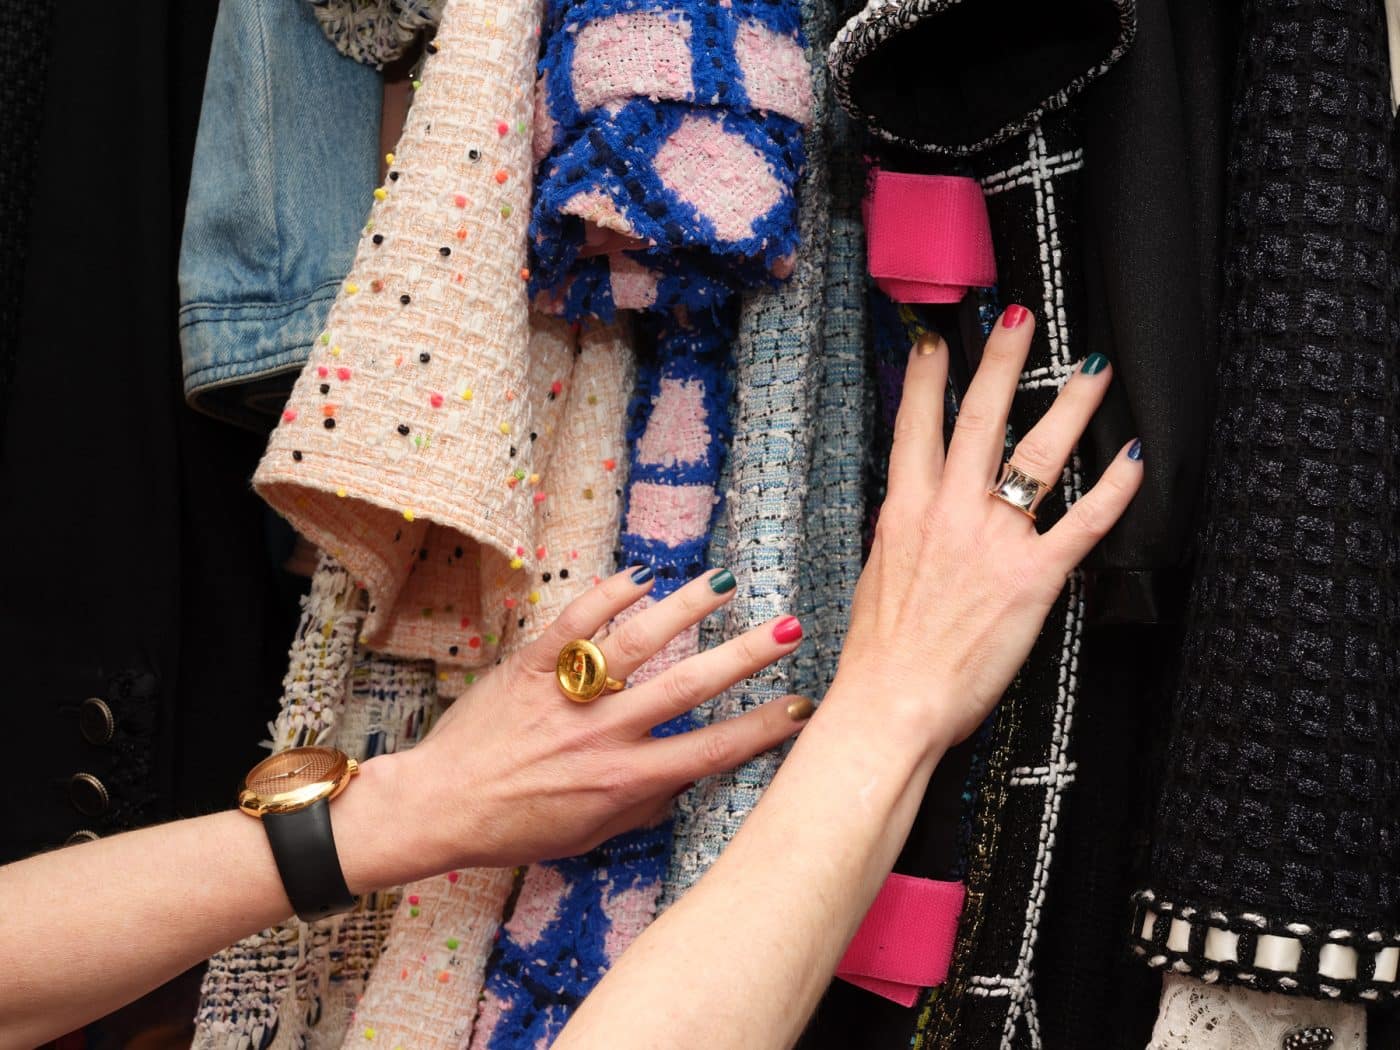 Sharon Coplan Hurwitz touches ensembles from various Chanel ready-to-wear collections.